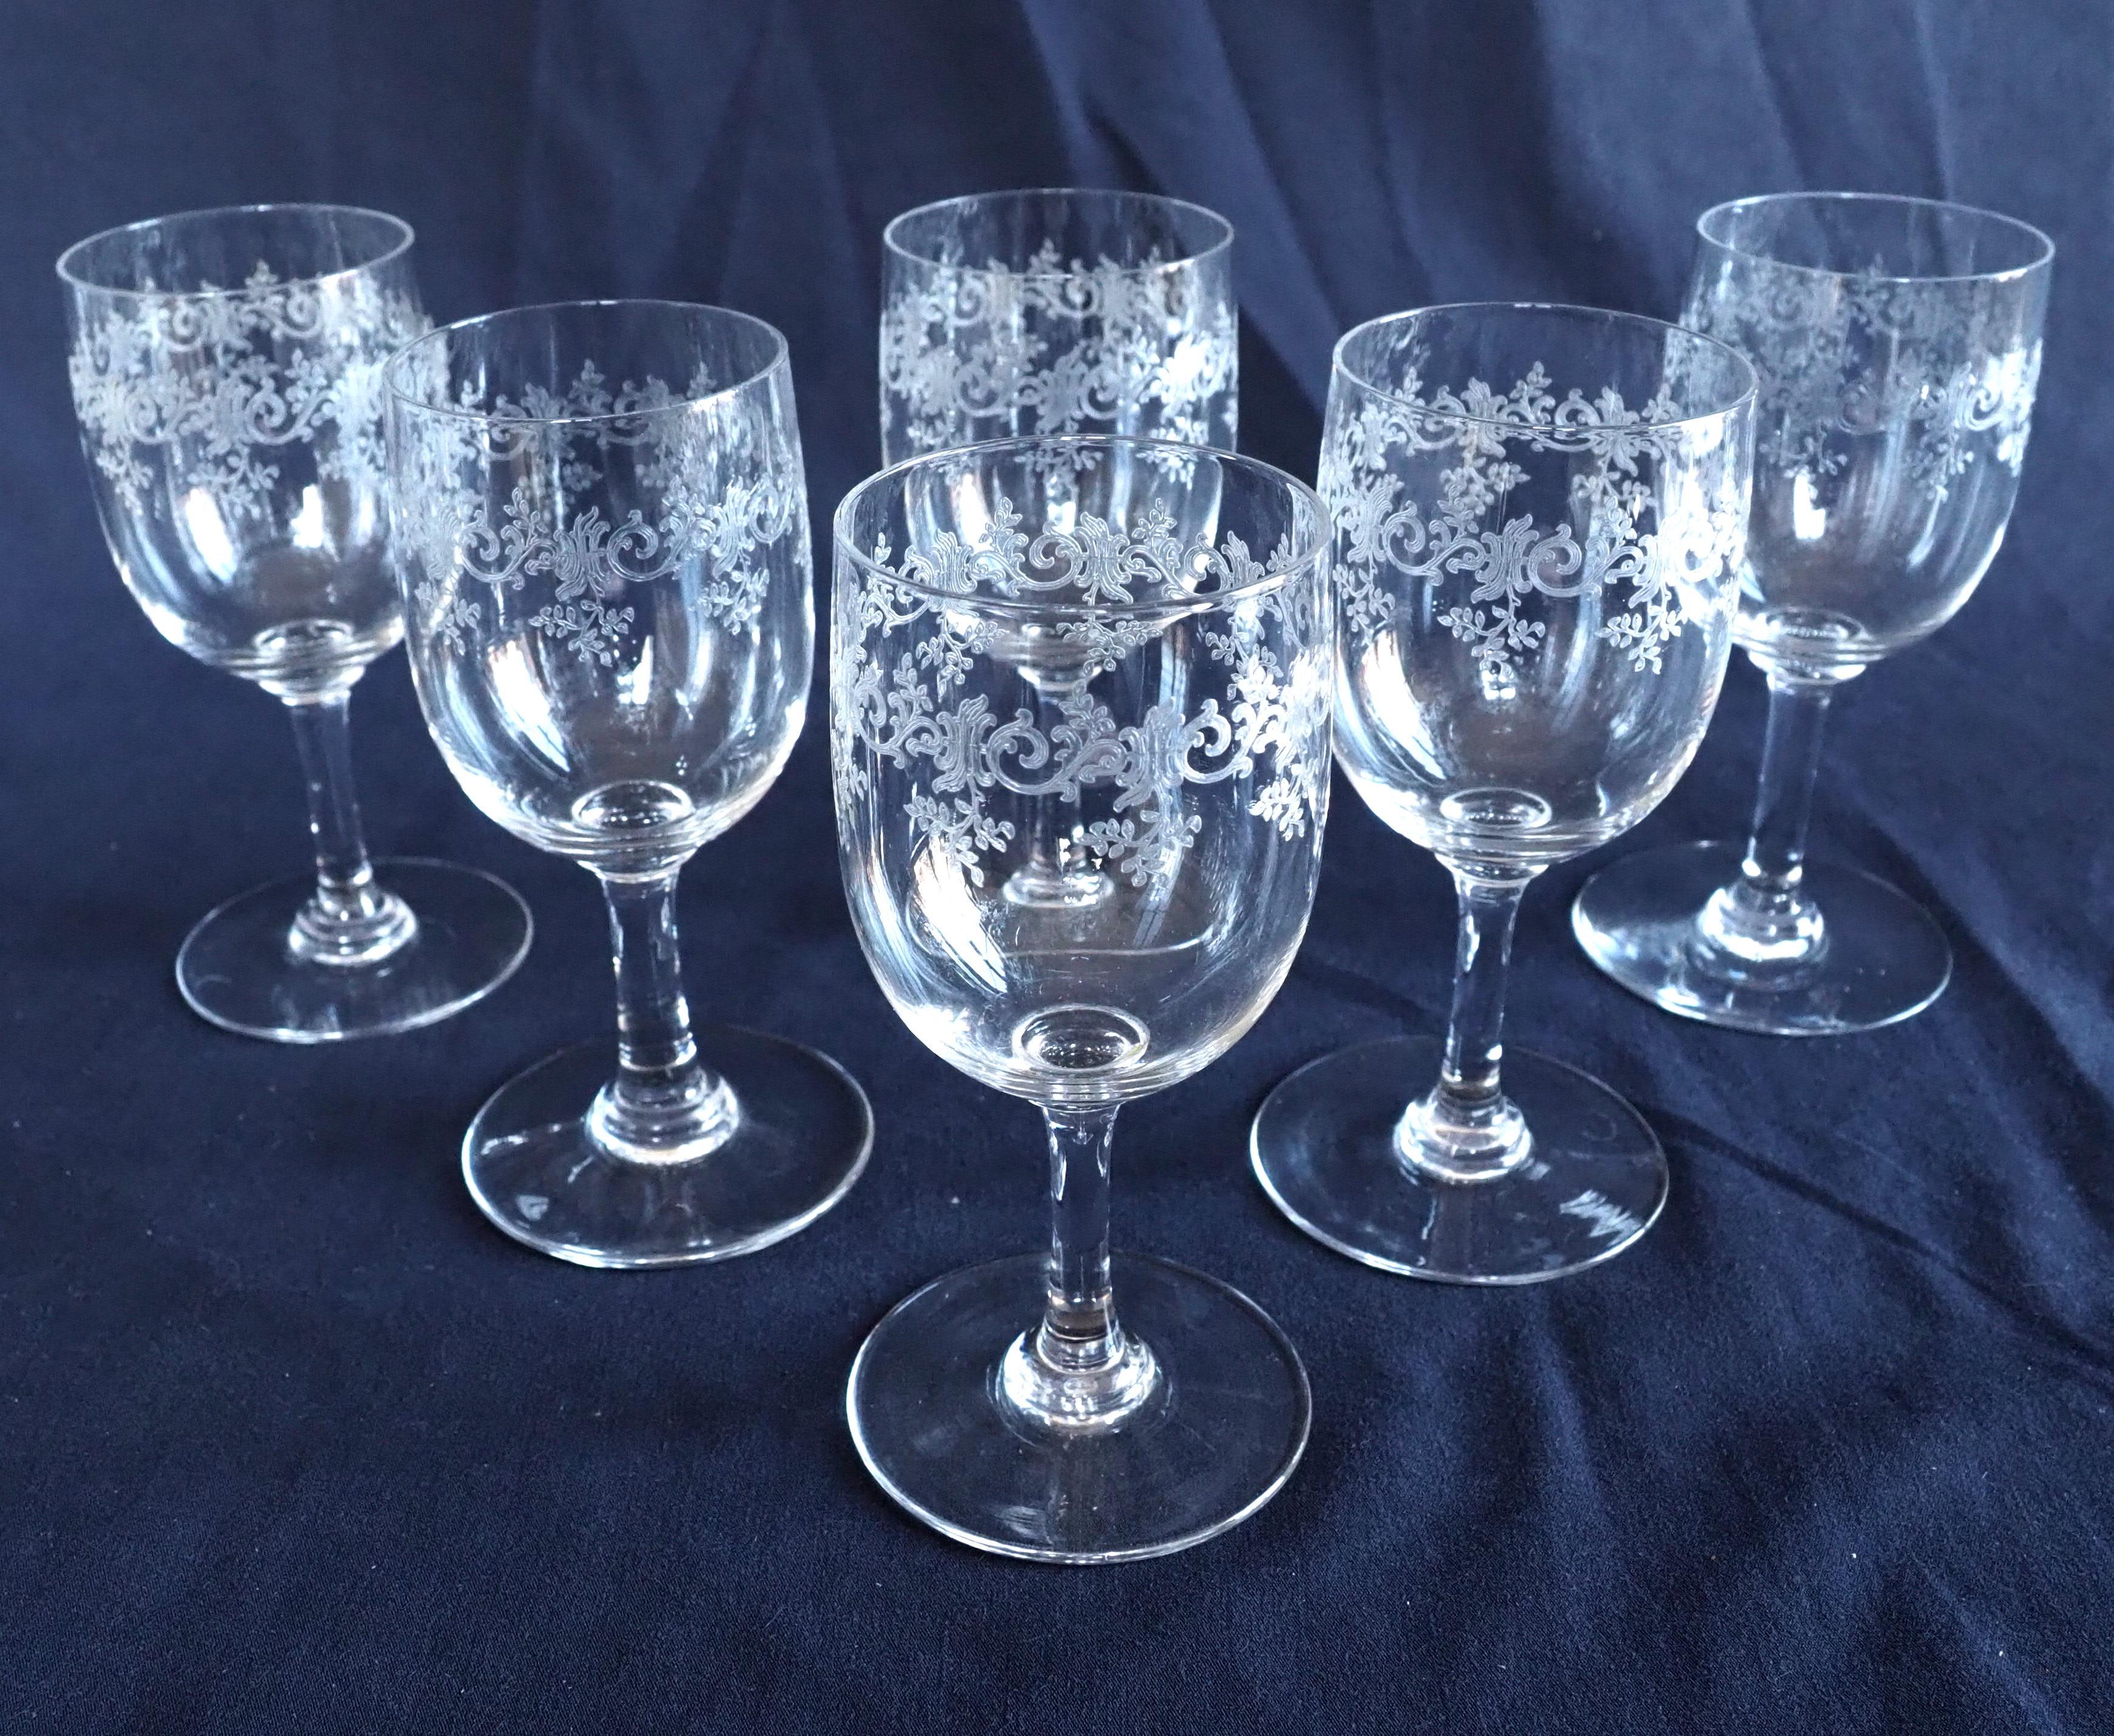 Set of 4 Baccarat crystal glasses, so-called Sevigne model, composed of :
- 1 water glass - American format (16.9cm high) (rare format)
- 1 red wine glass (cm high)
- 1 white wine glass (cm high)
- 1 port glass (cm high).
Sevigne is a very elegant